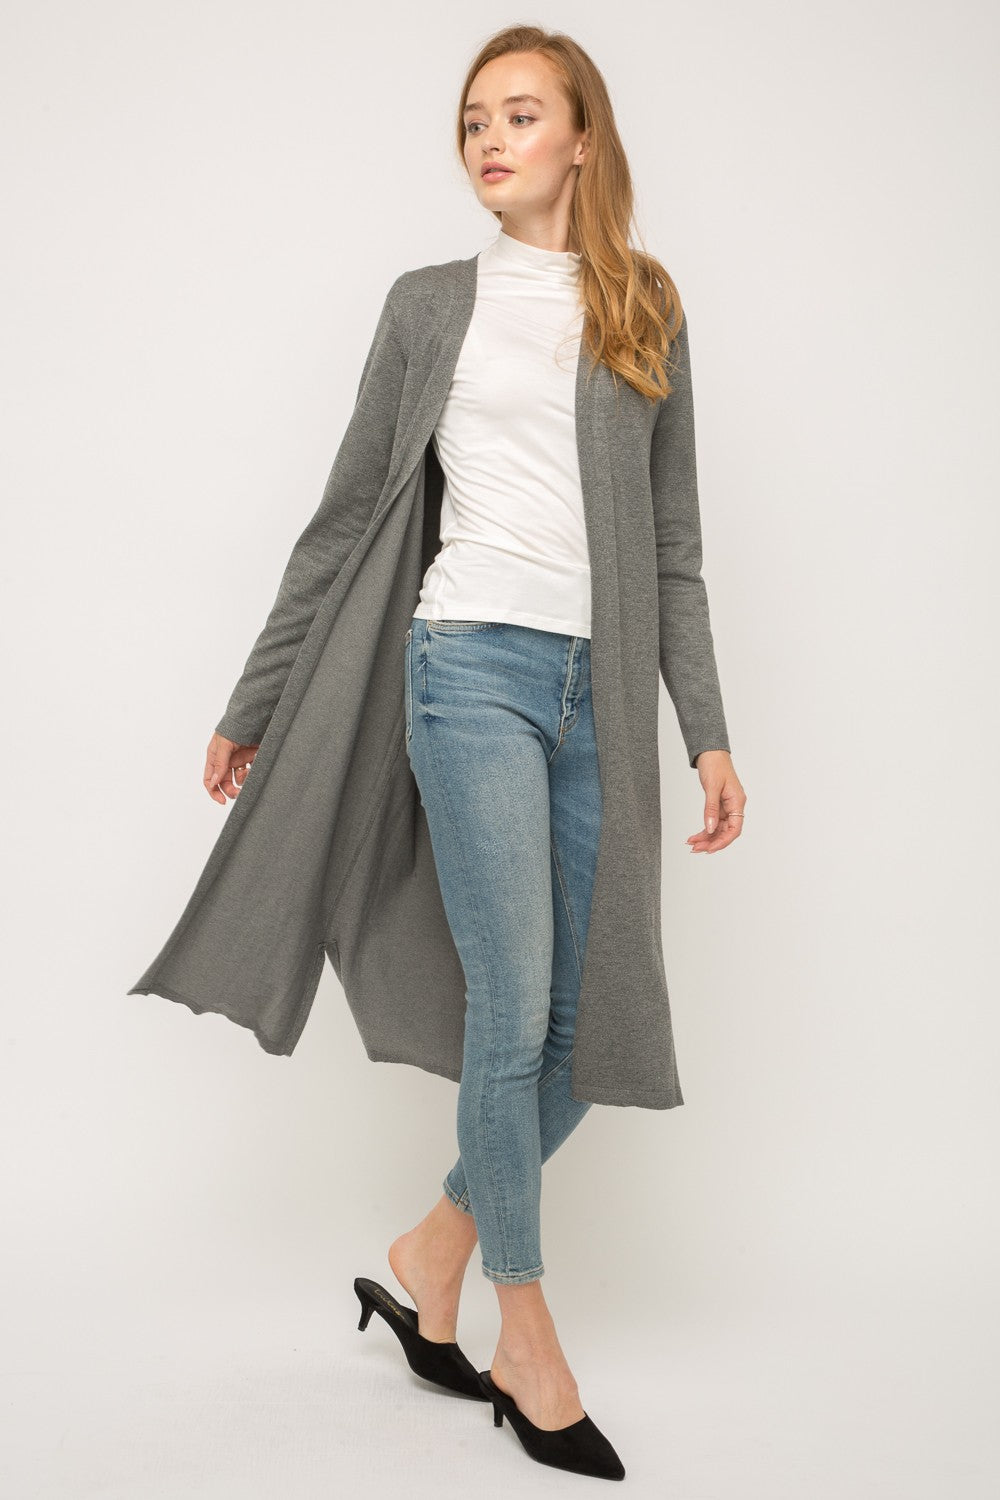 Long Open Front Cardigan Sweater